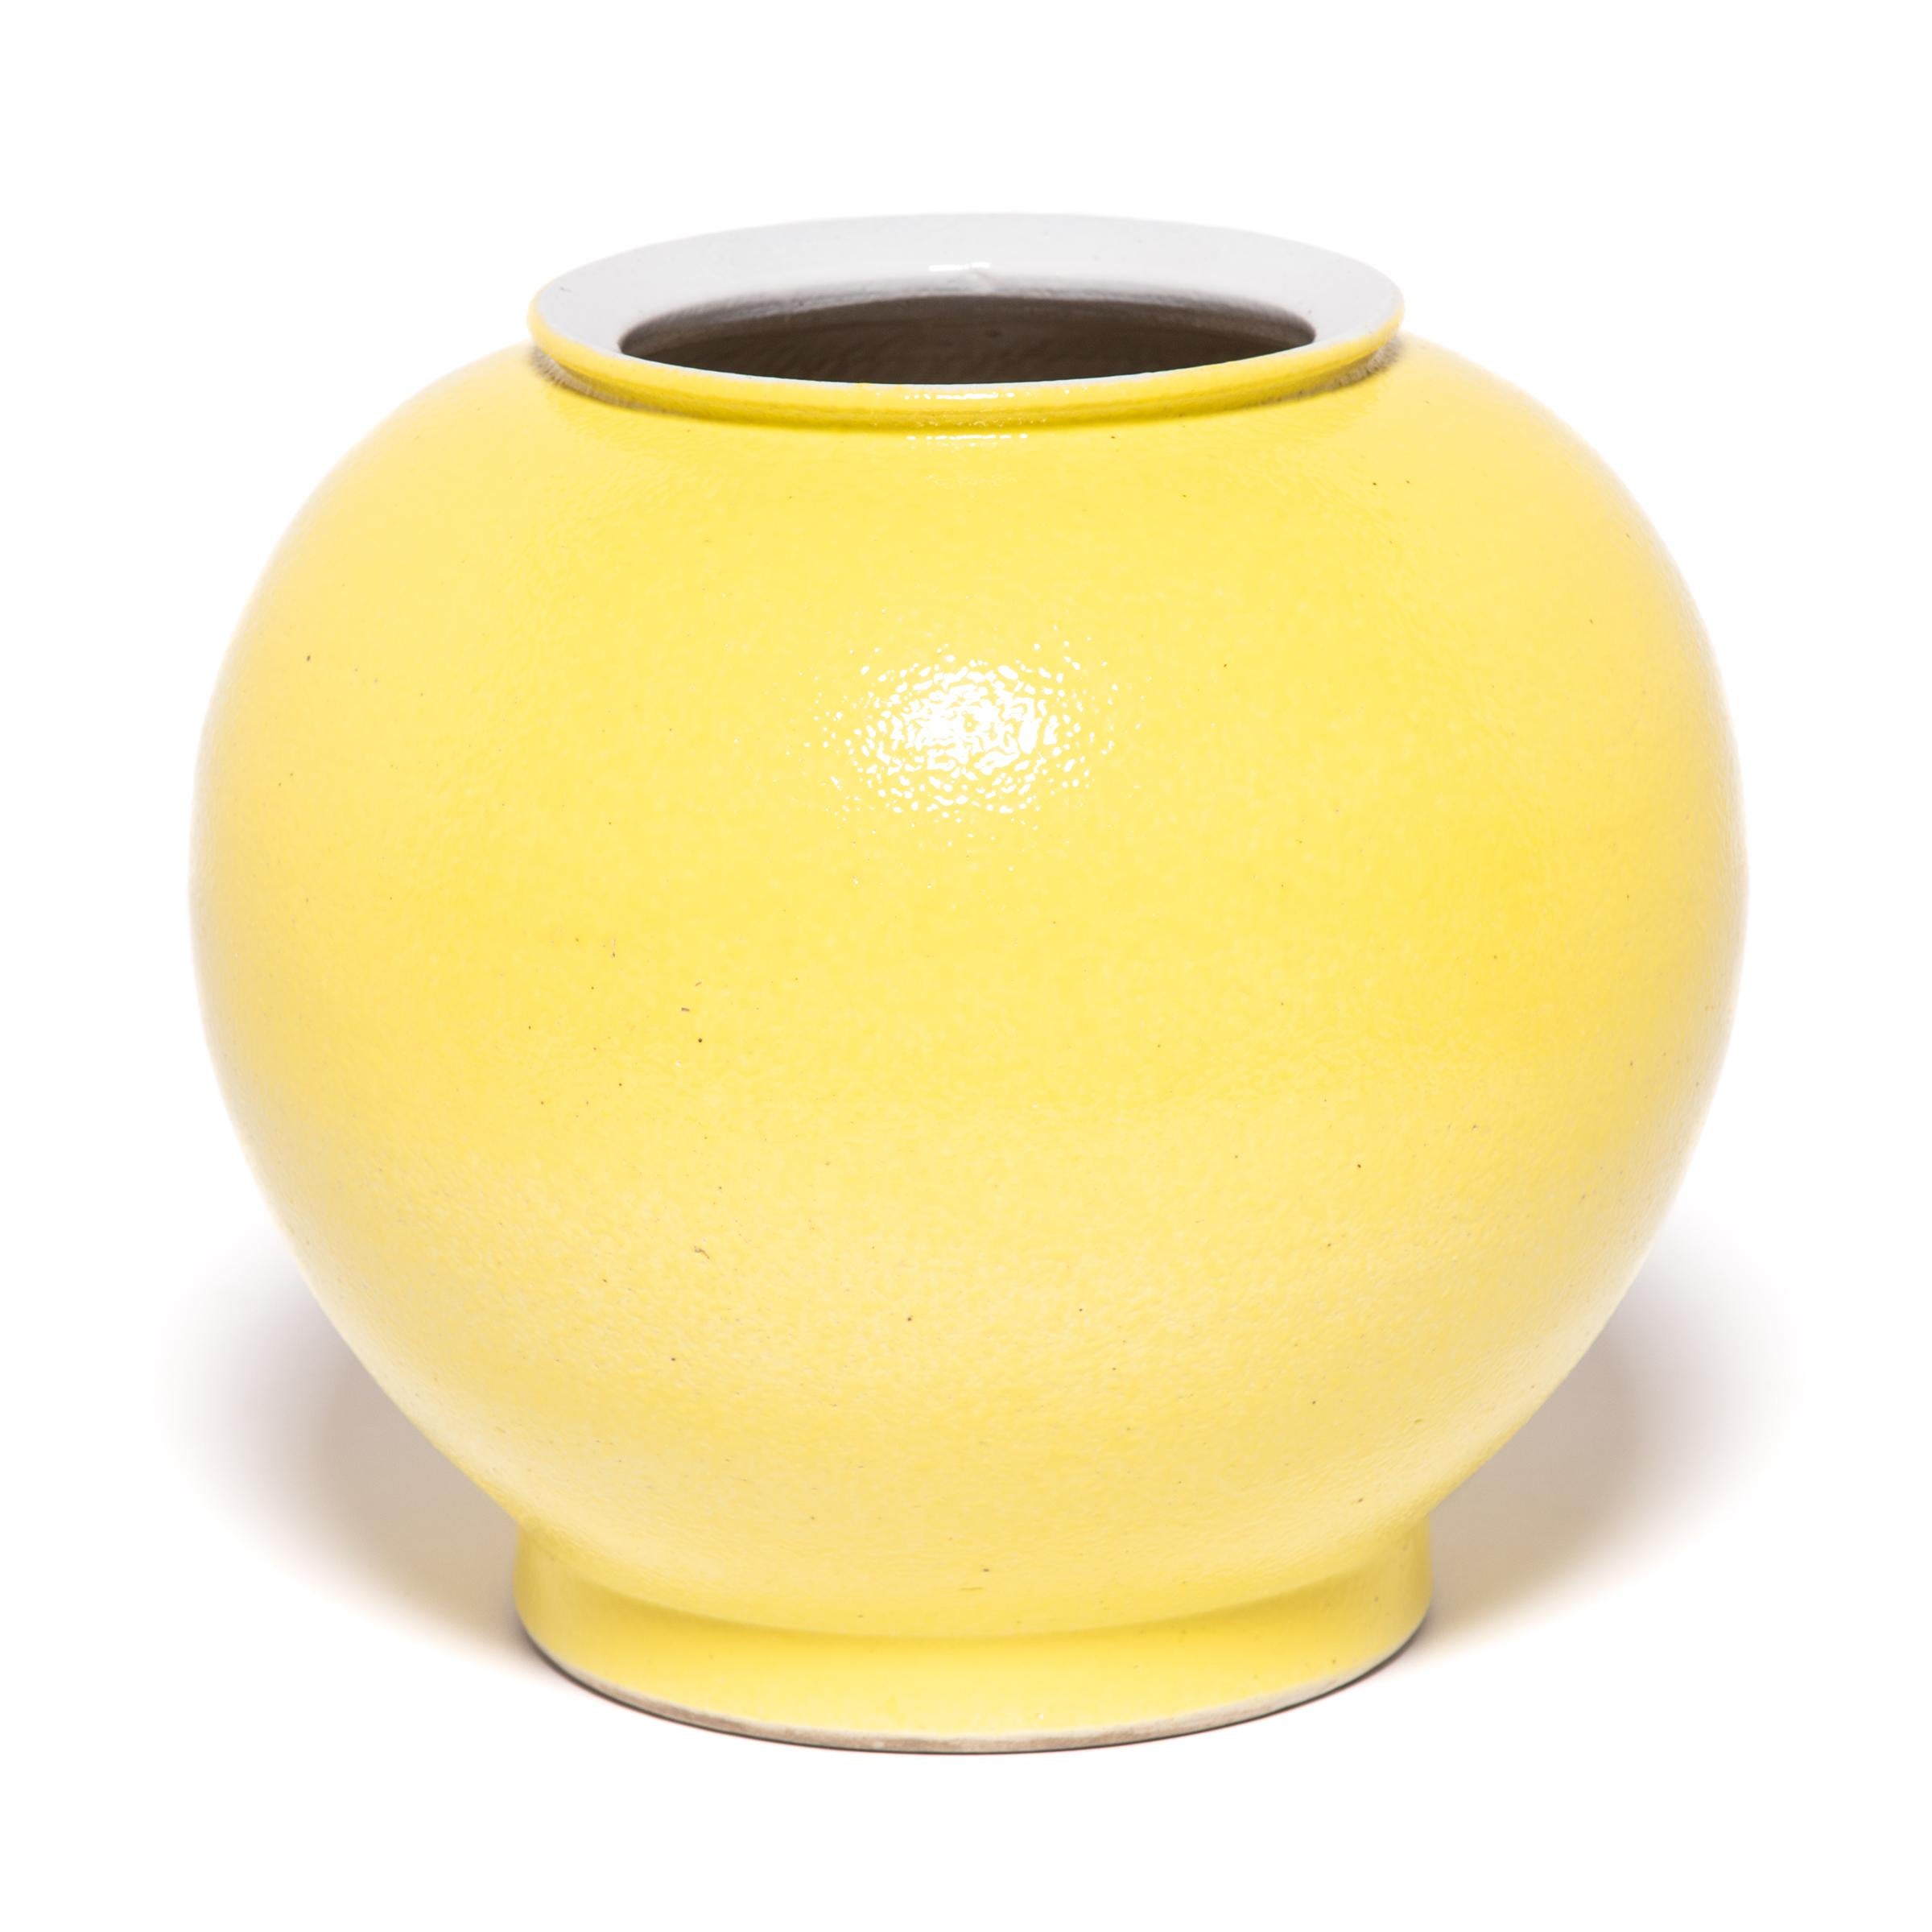 The striking bright yellow of this vase draws on a long Chinese tradition of glazing sculptural forms with a single, statement-making color. This contemporary take cloaks the round curves of the onion vase form in a glossy, citron yellow. Considered